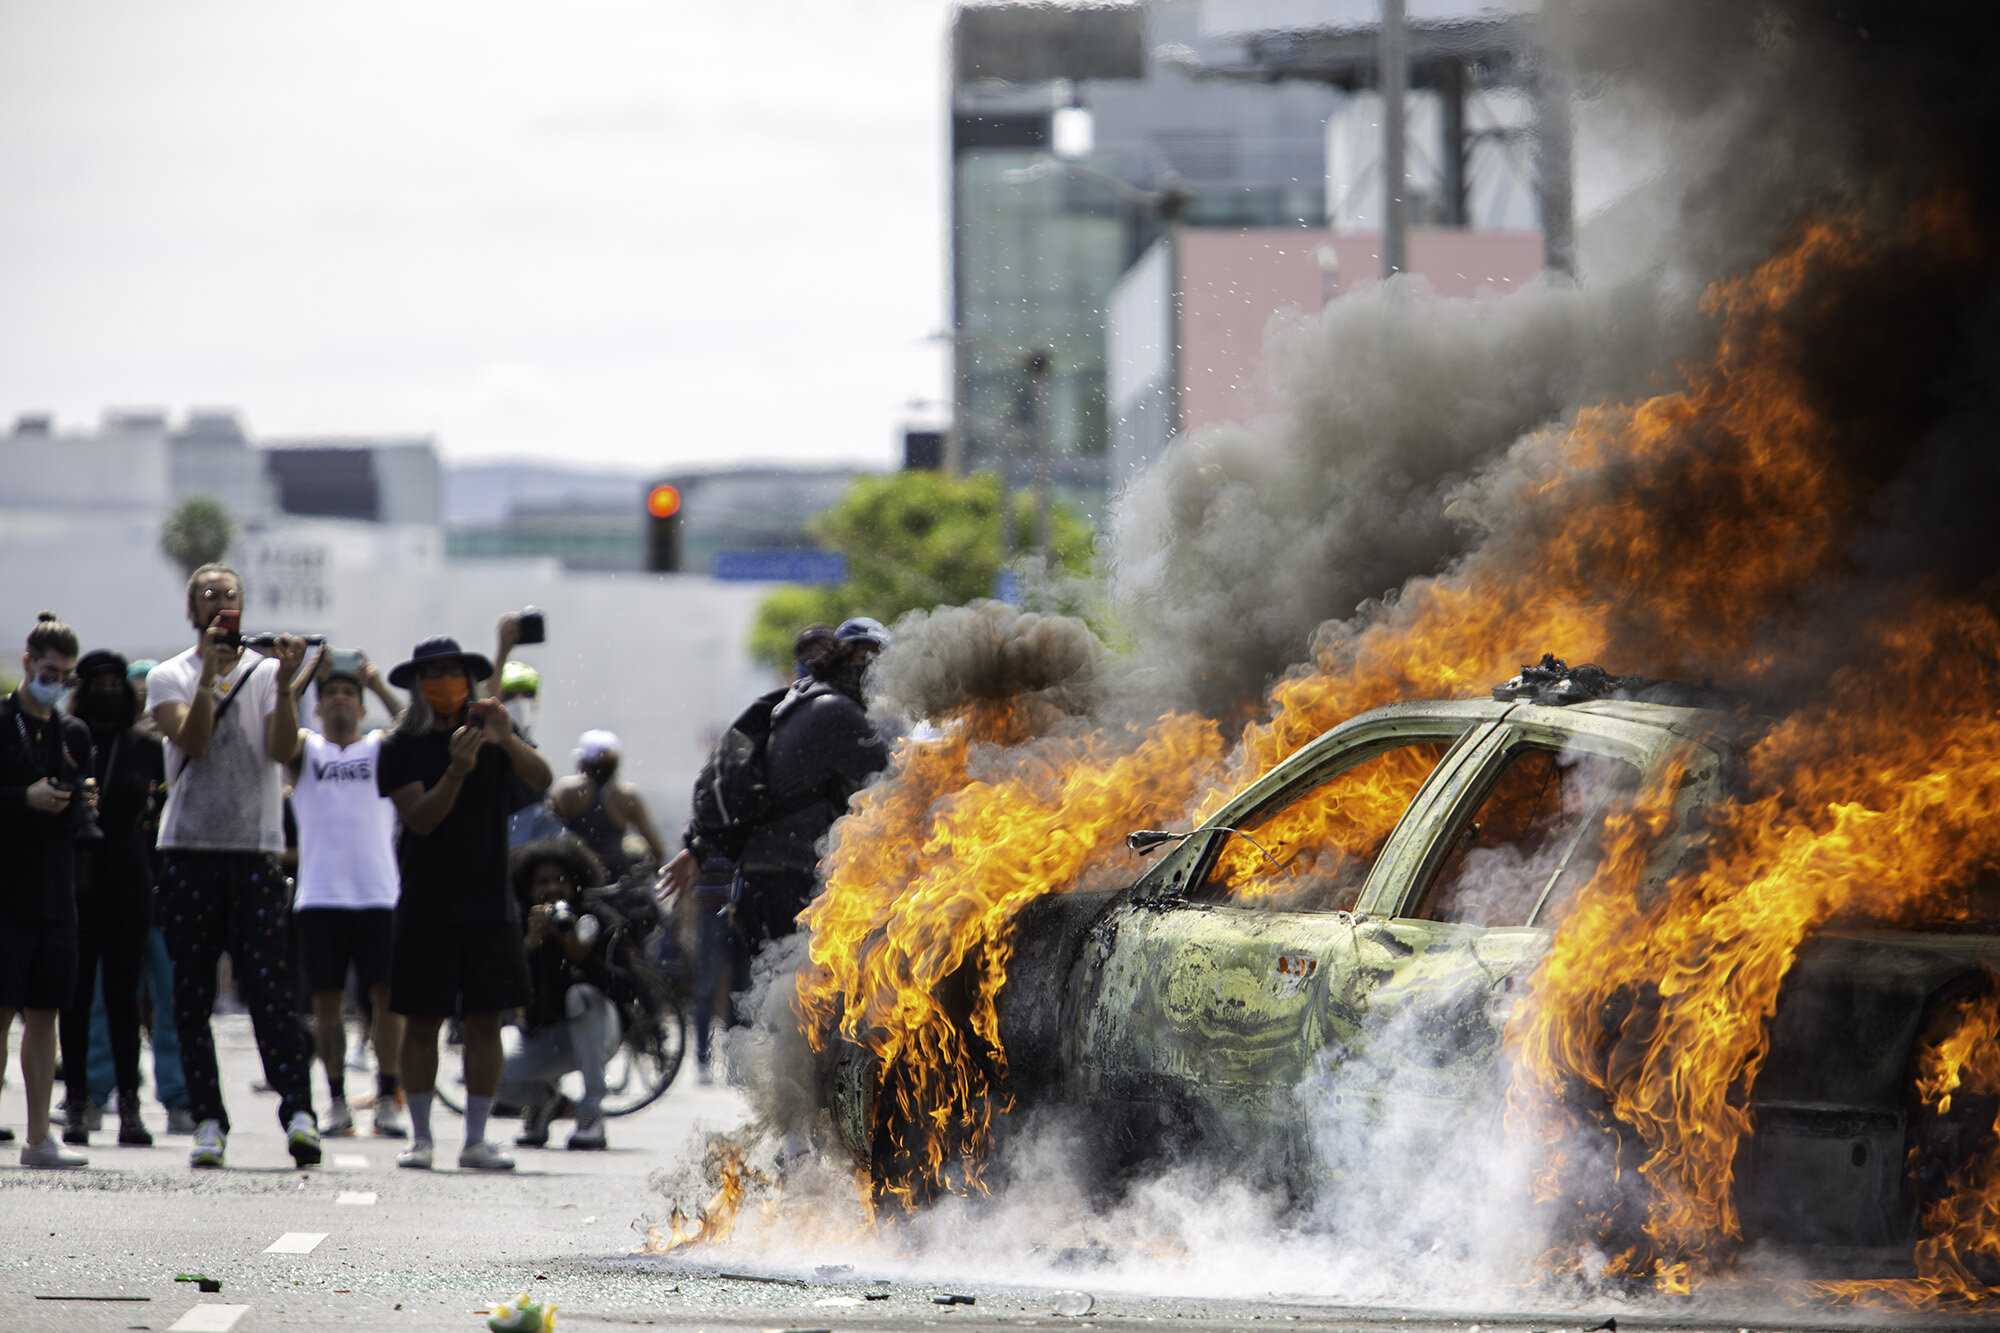  Protesters watch a police car burn on Saturday, May 30, 2020, in Los Angeles, Calif. The killing by police of George Floyd in Minneapolis, MN on May 25, triggered nationwide protests, some of which turned violent. 